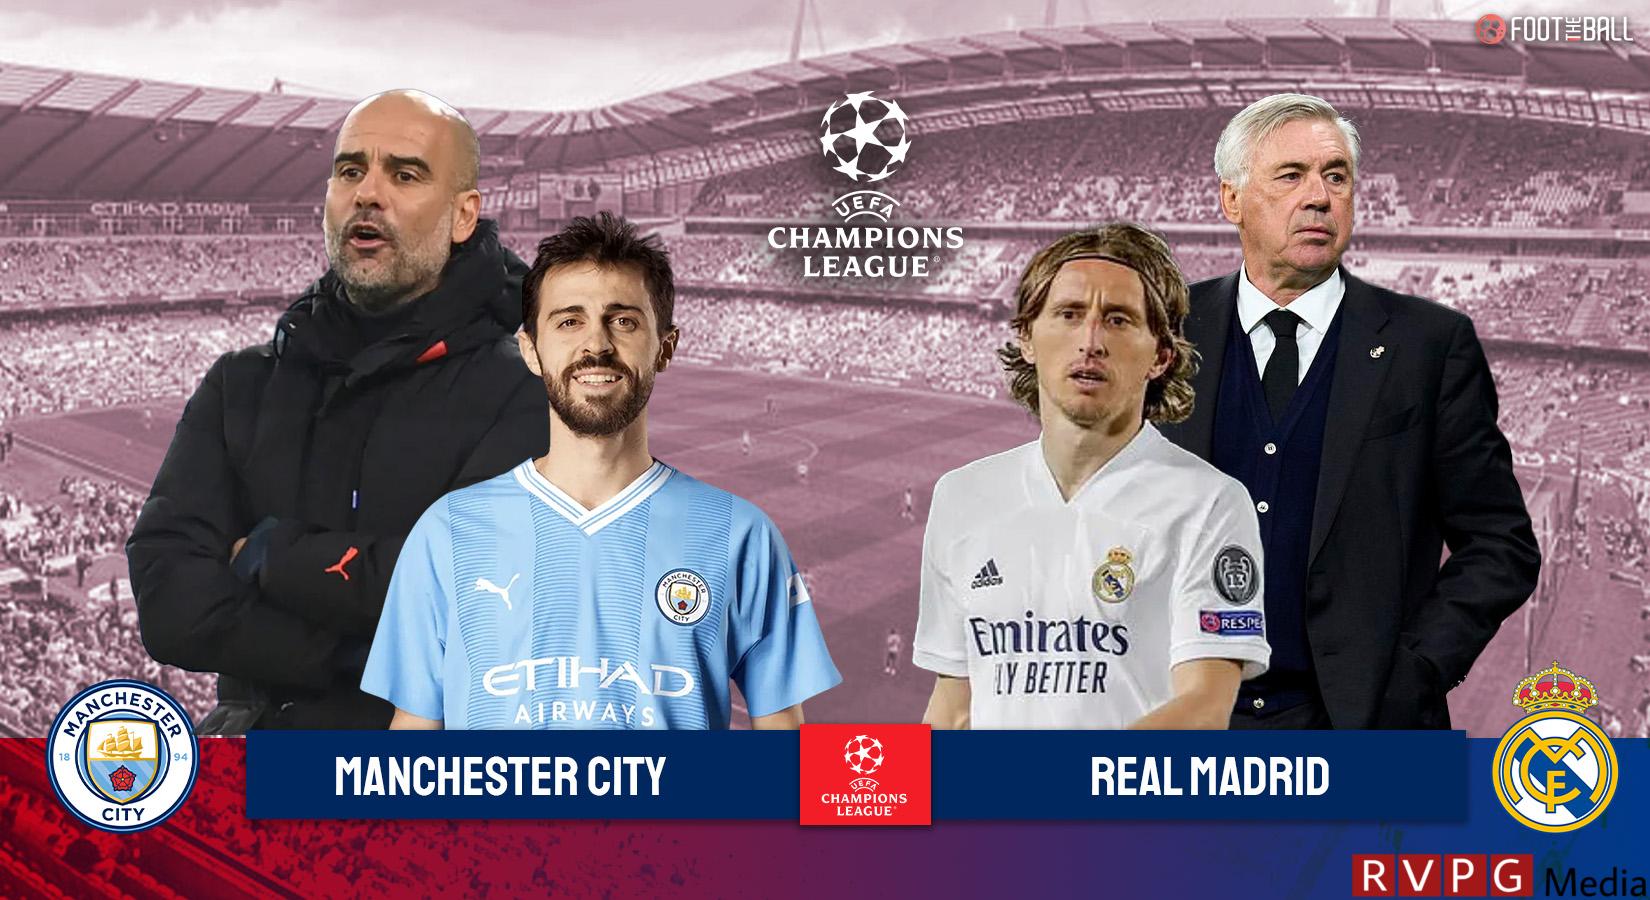 Champions League preview between Manchester City and Real Madrid: